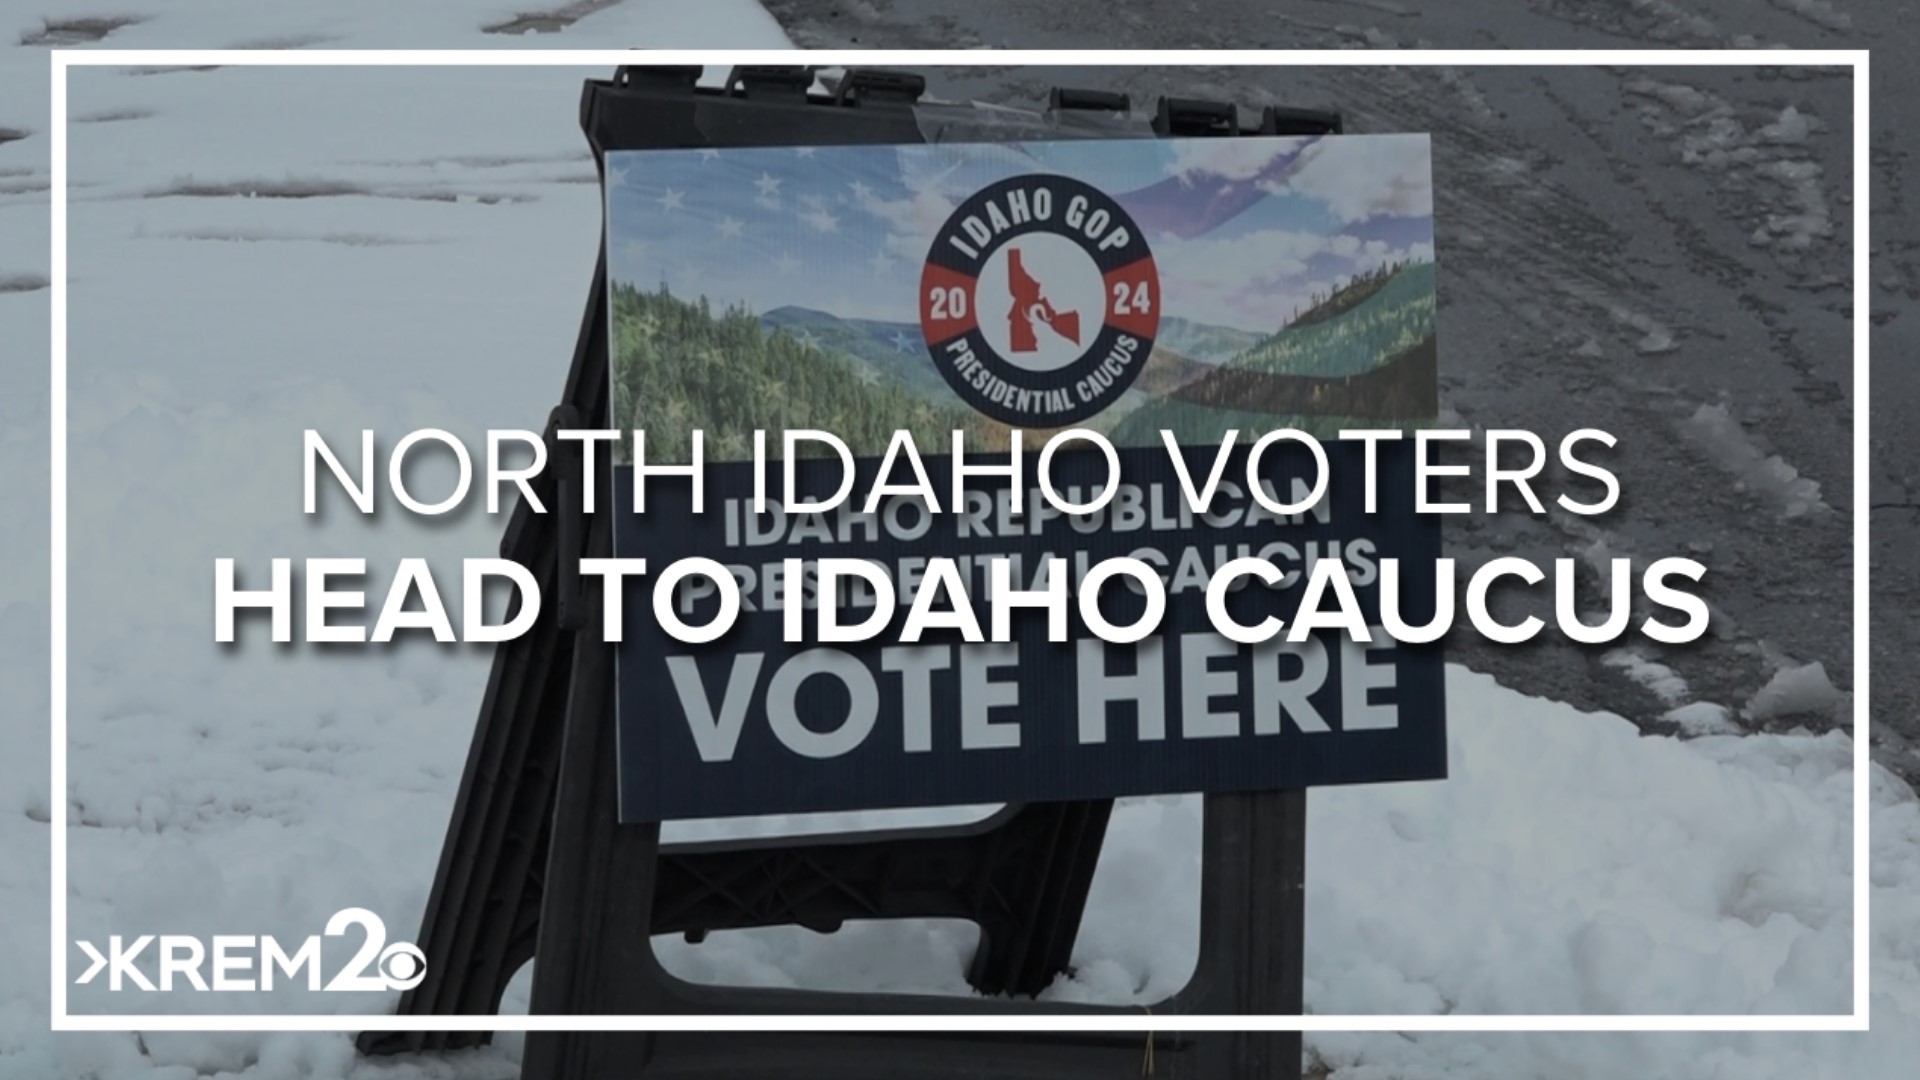 For the first time in 12 years, Idaho hosted a caucus for the Presidential primary. 21 sites in Kootenai County hosted the caucus.